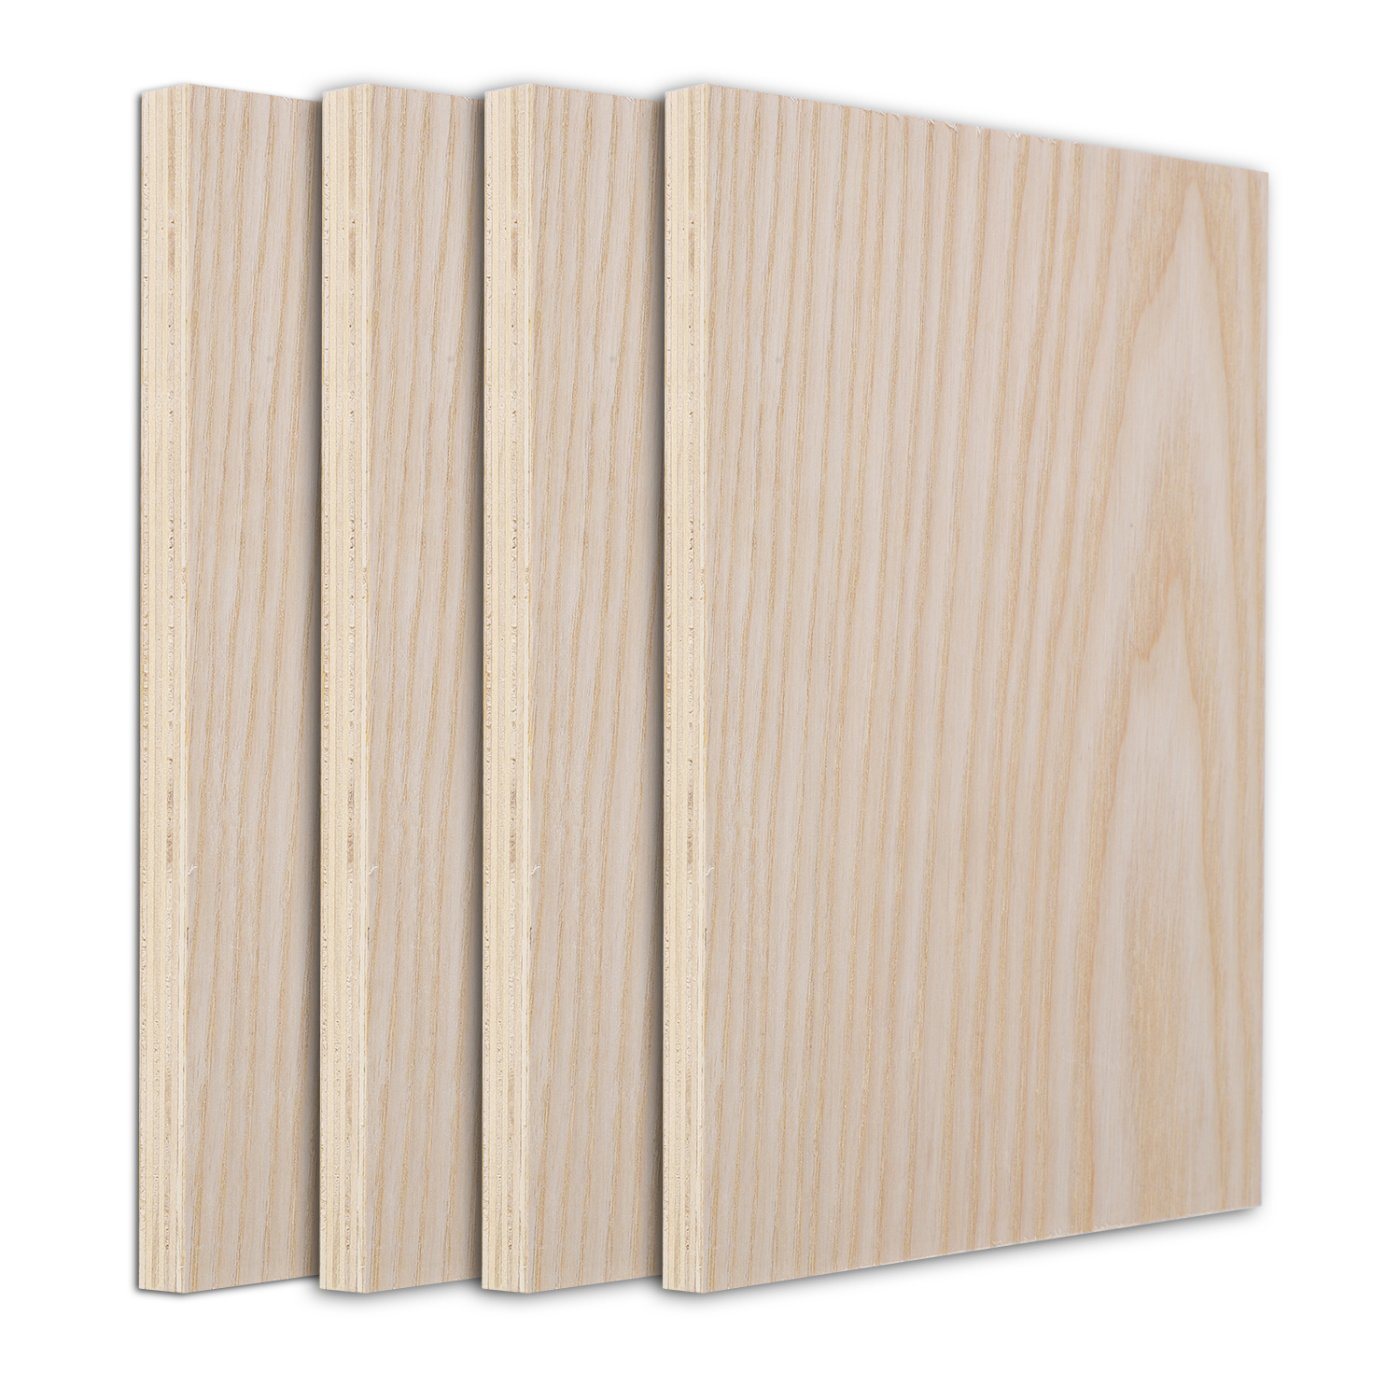 Cheap Price 18mm Pine Commercial Plywood Woodgrain Board for Furniture